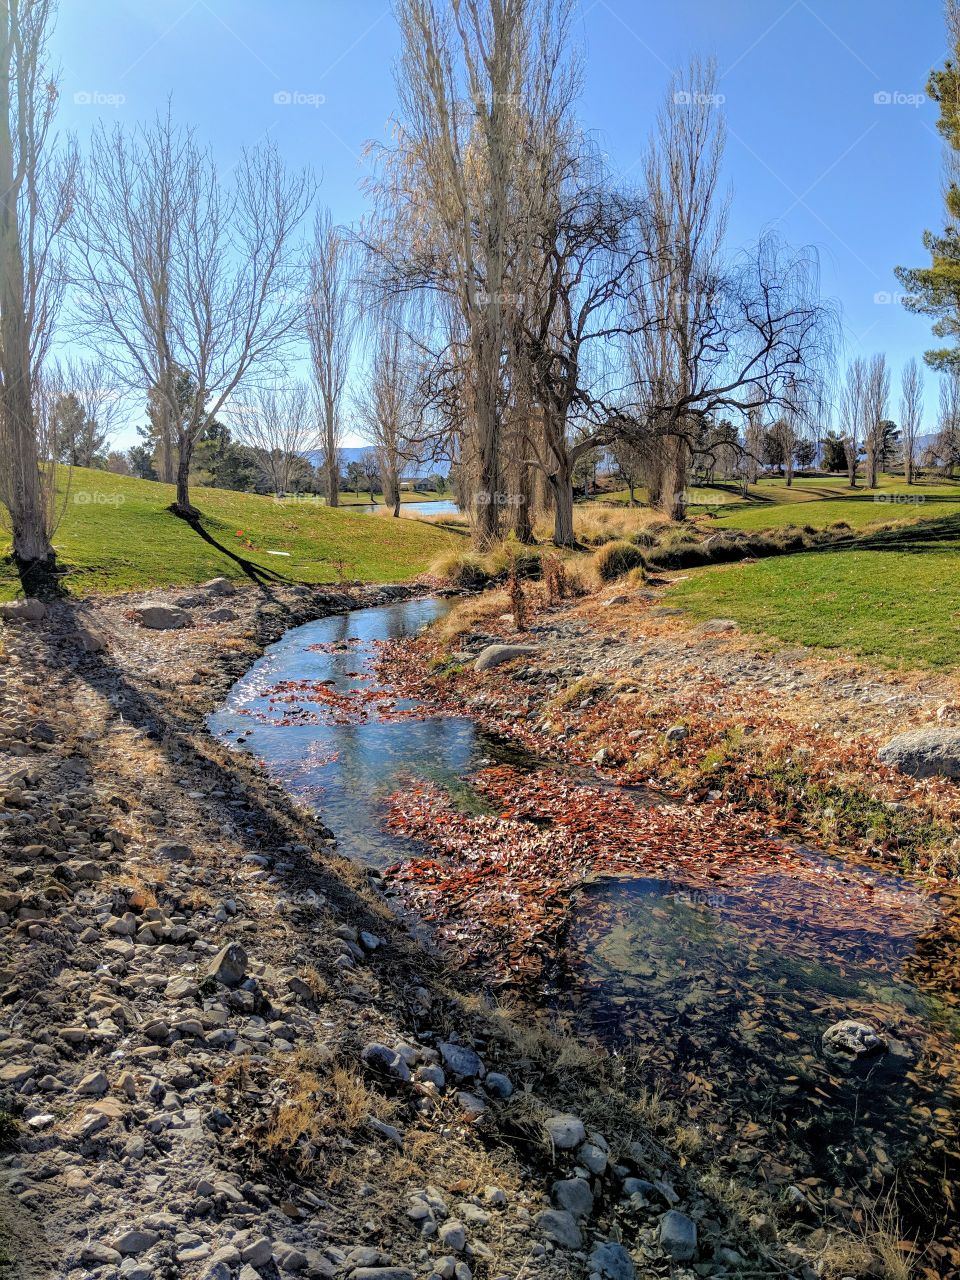 stream amidst bare trees and fallen leaves